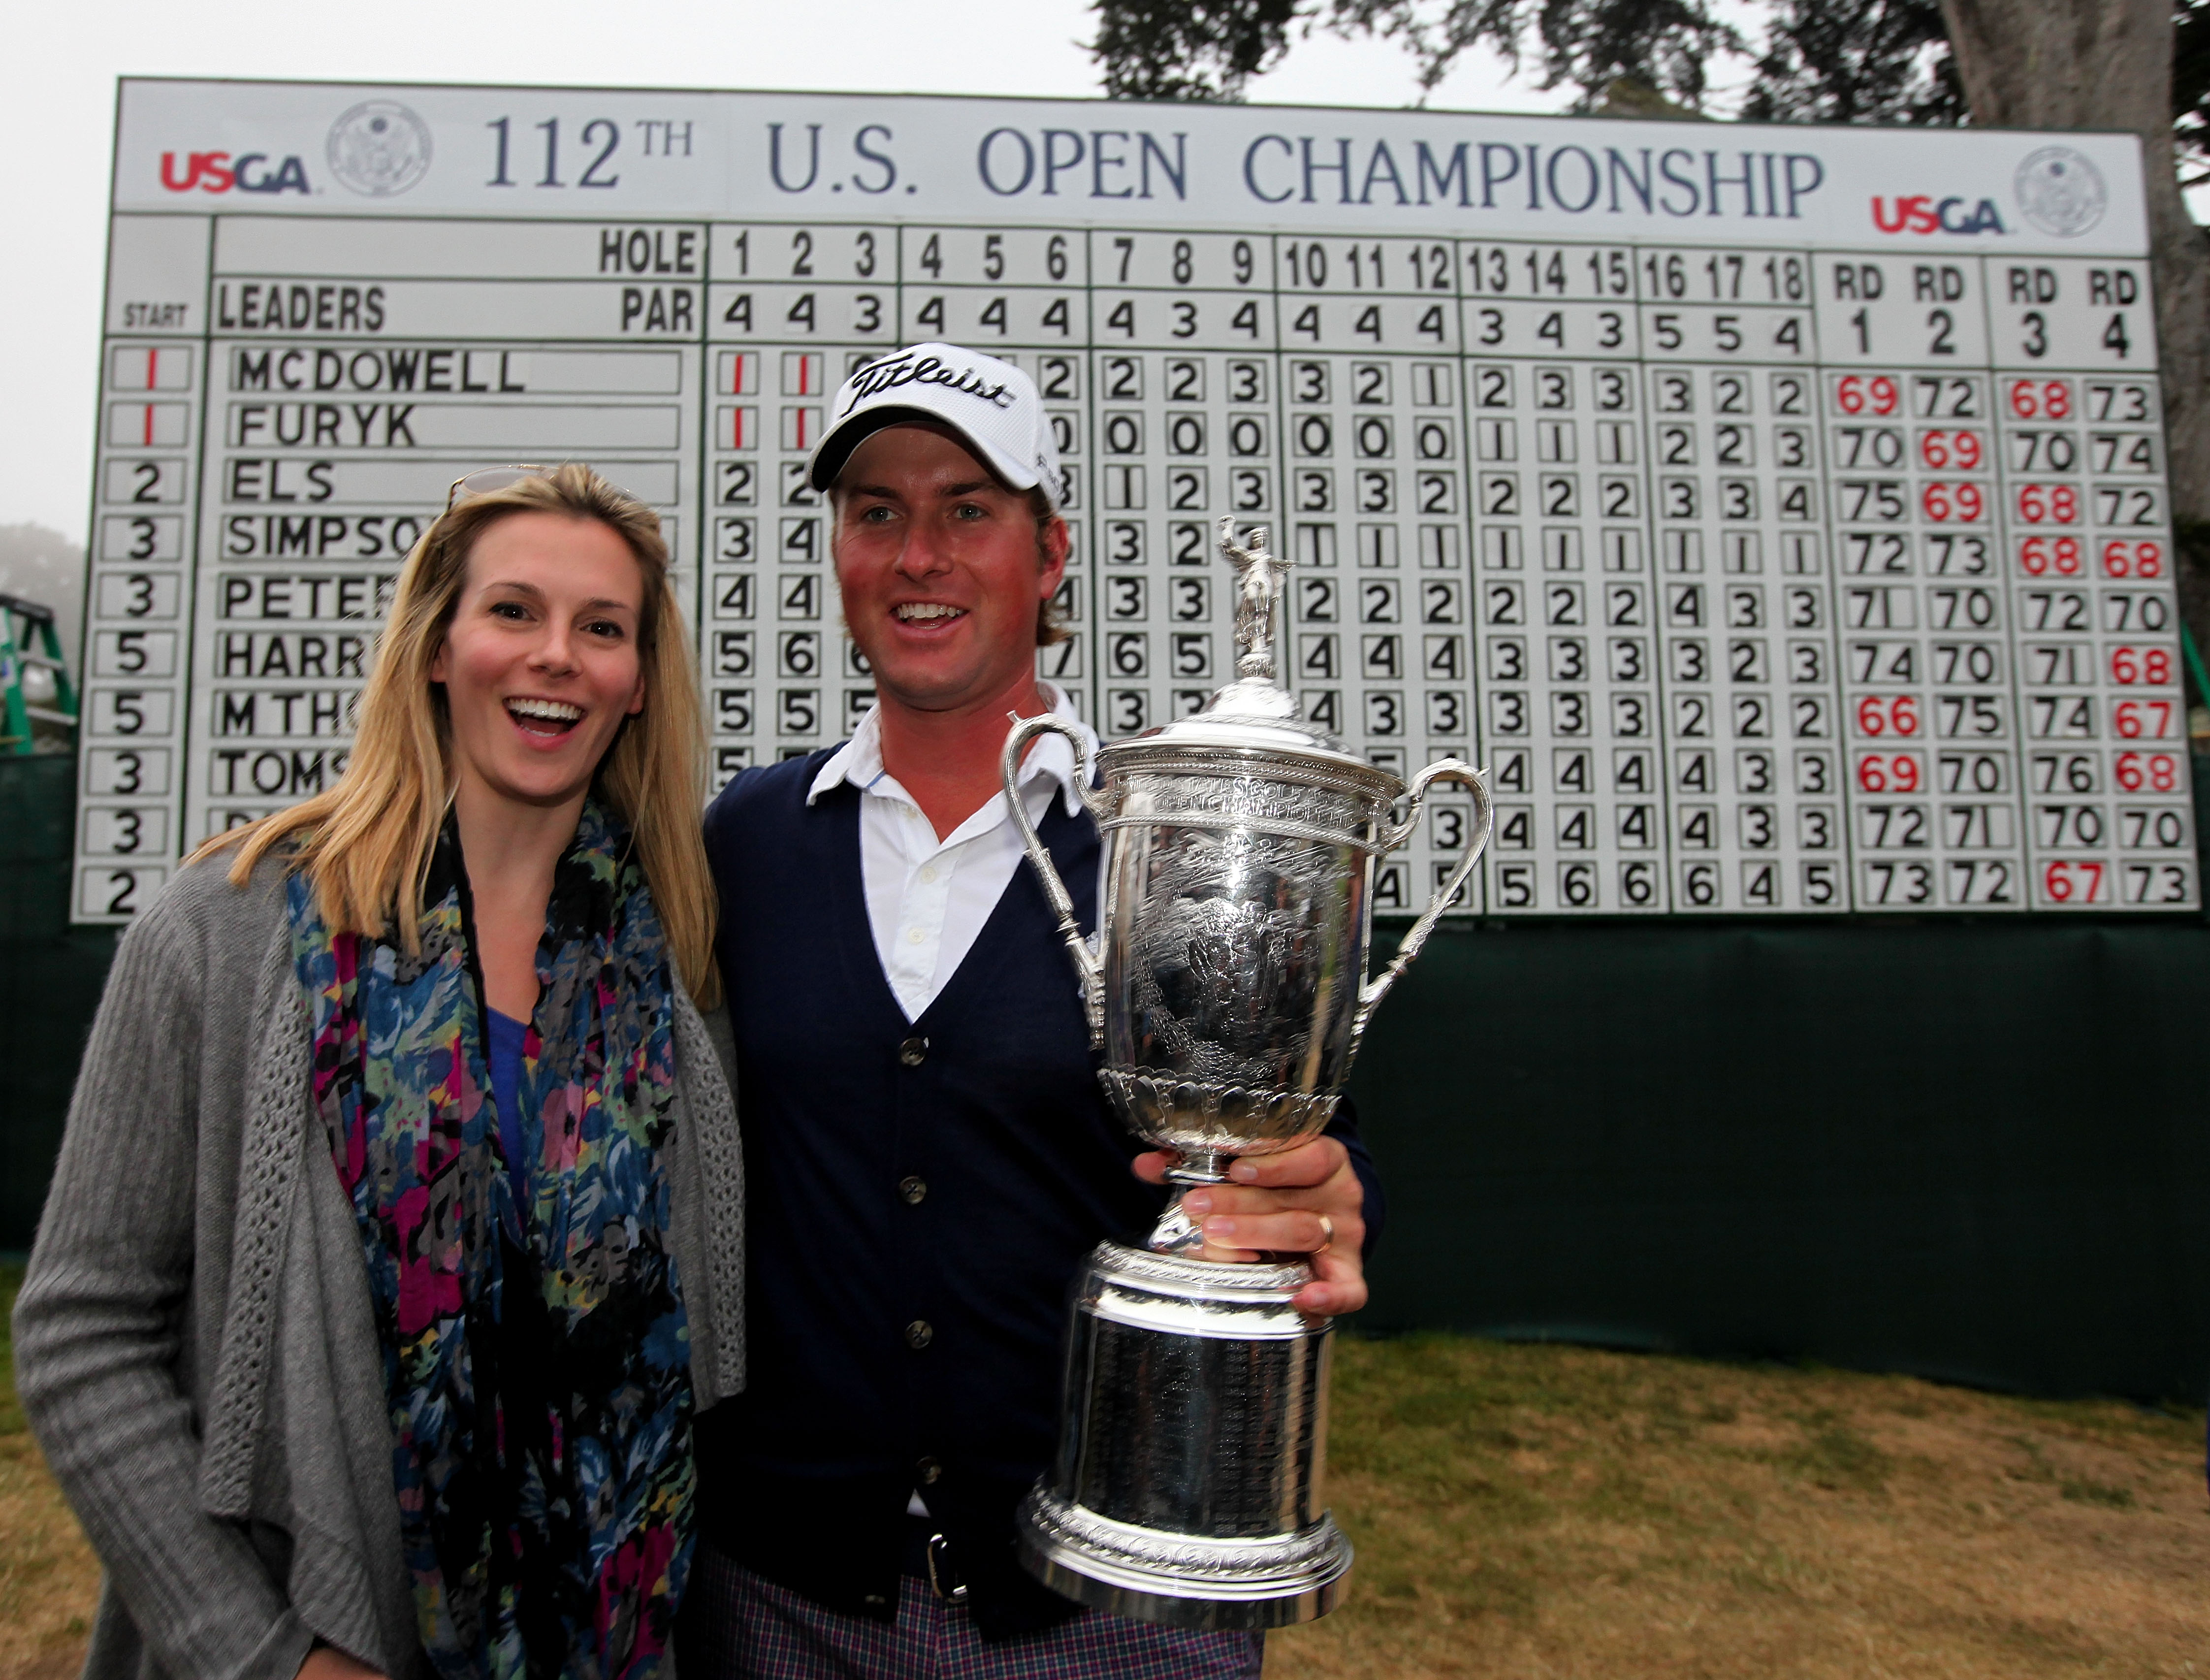 Simpson with his wife at the US Open